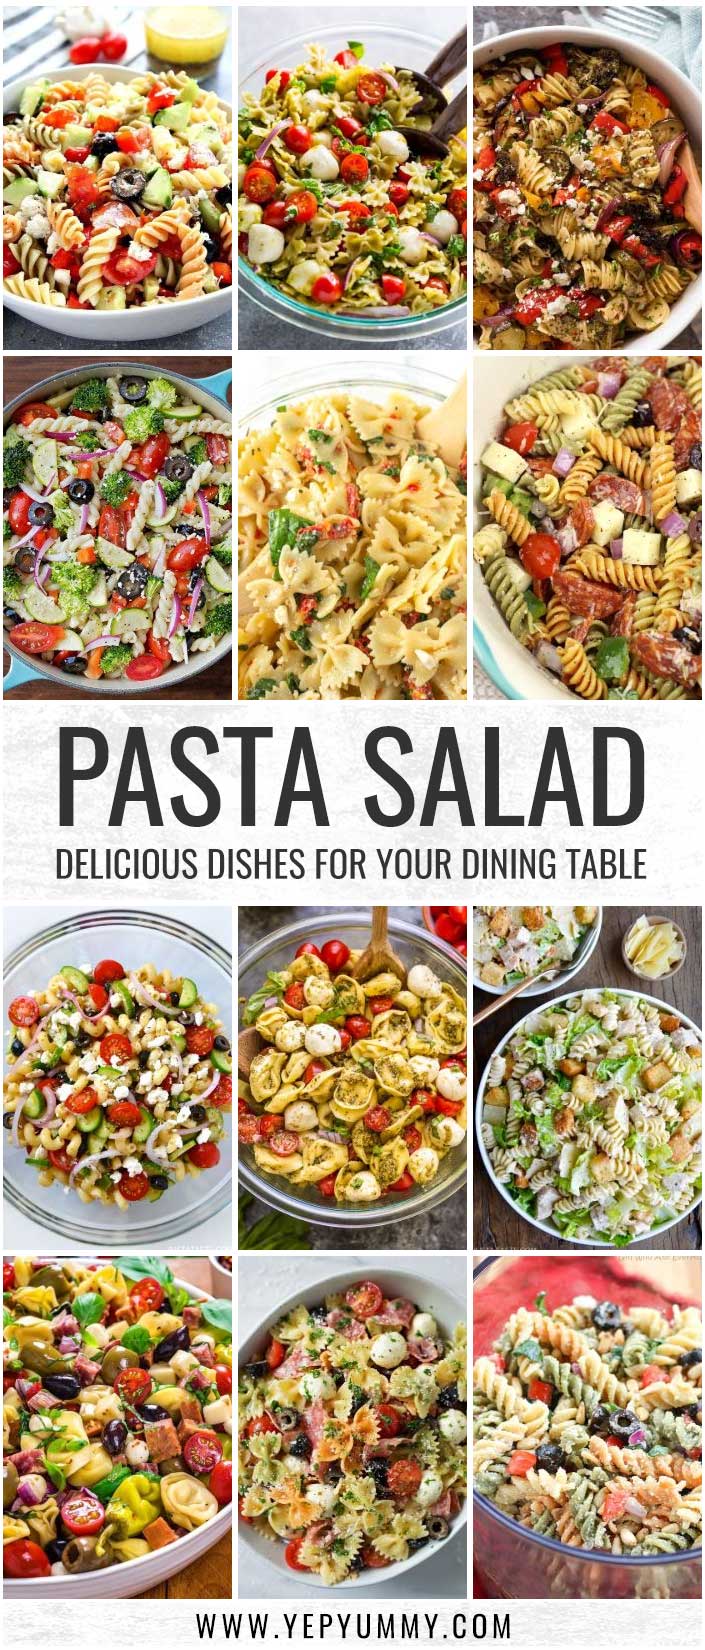 Pasta Salad: Delicious Dishes For Your Dining Table